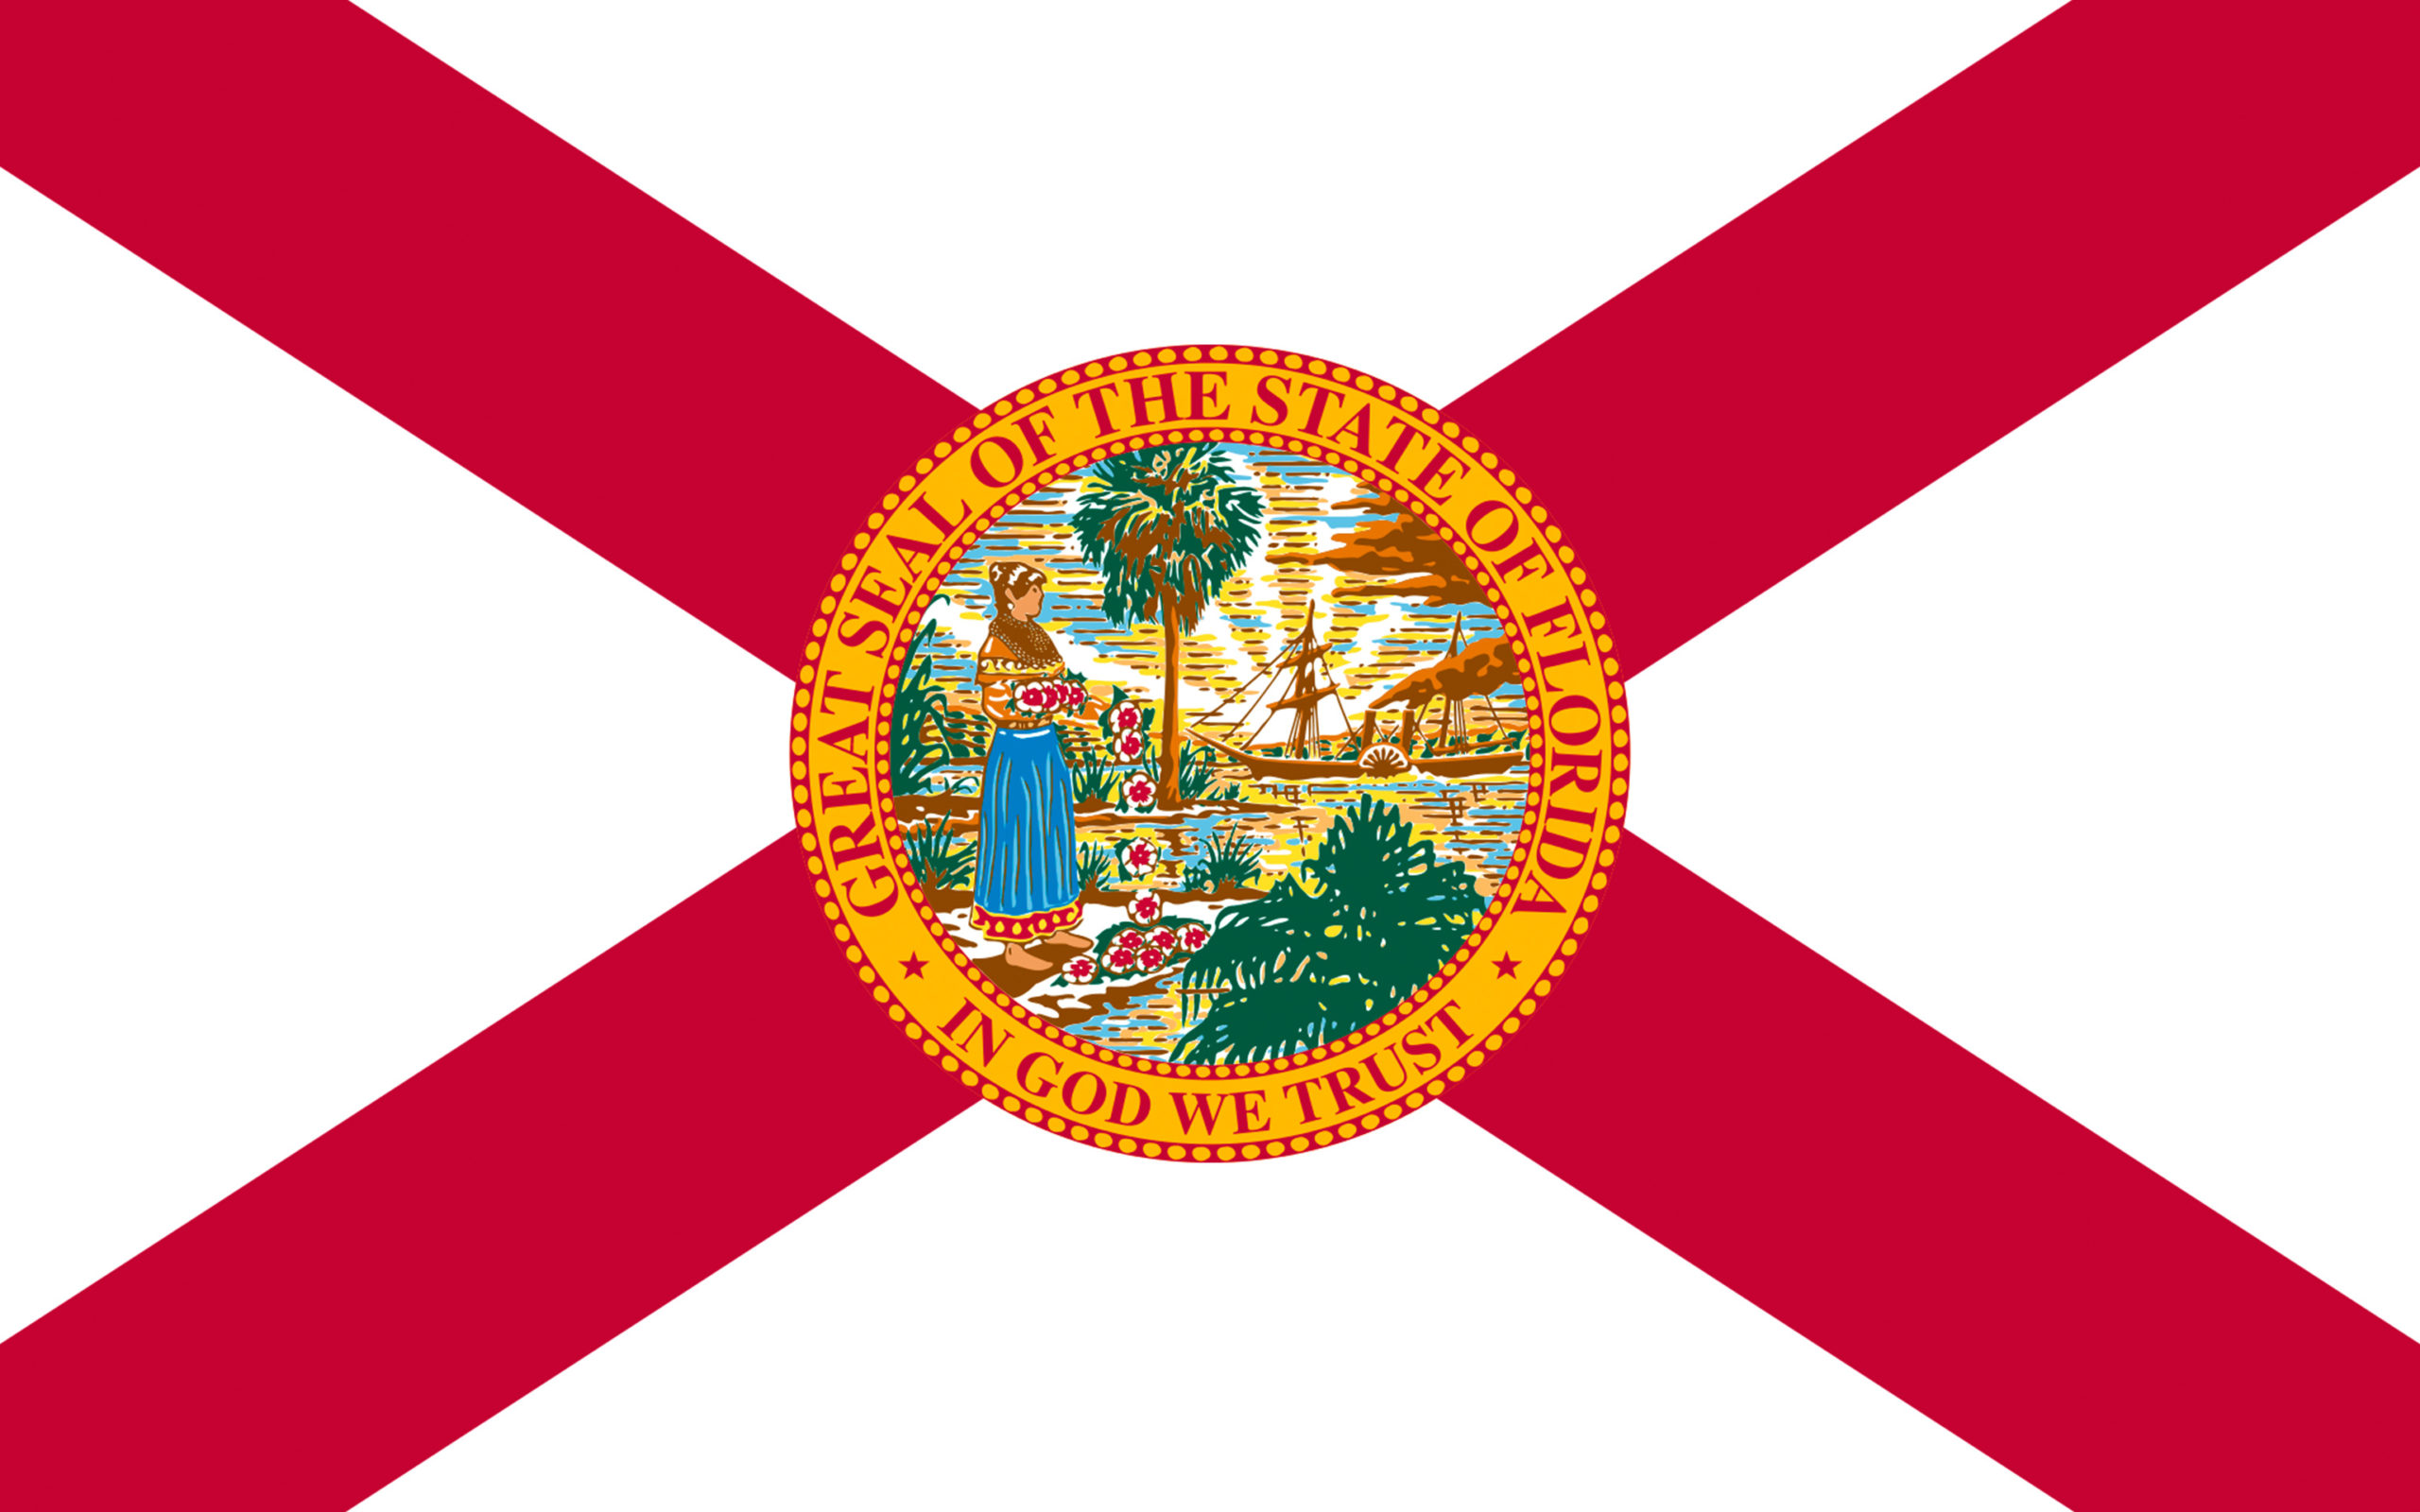 Meet Ruth Smith – Florida’s New State Director